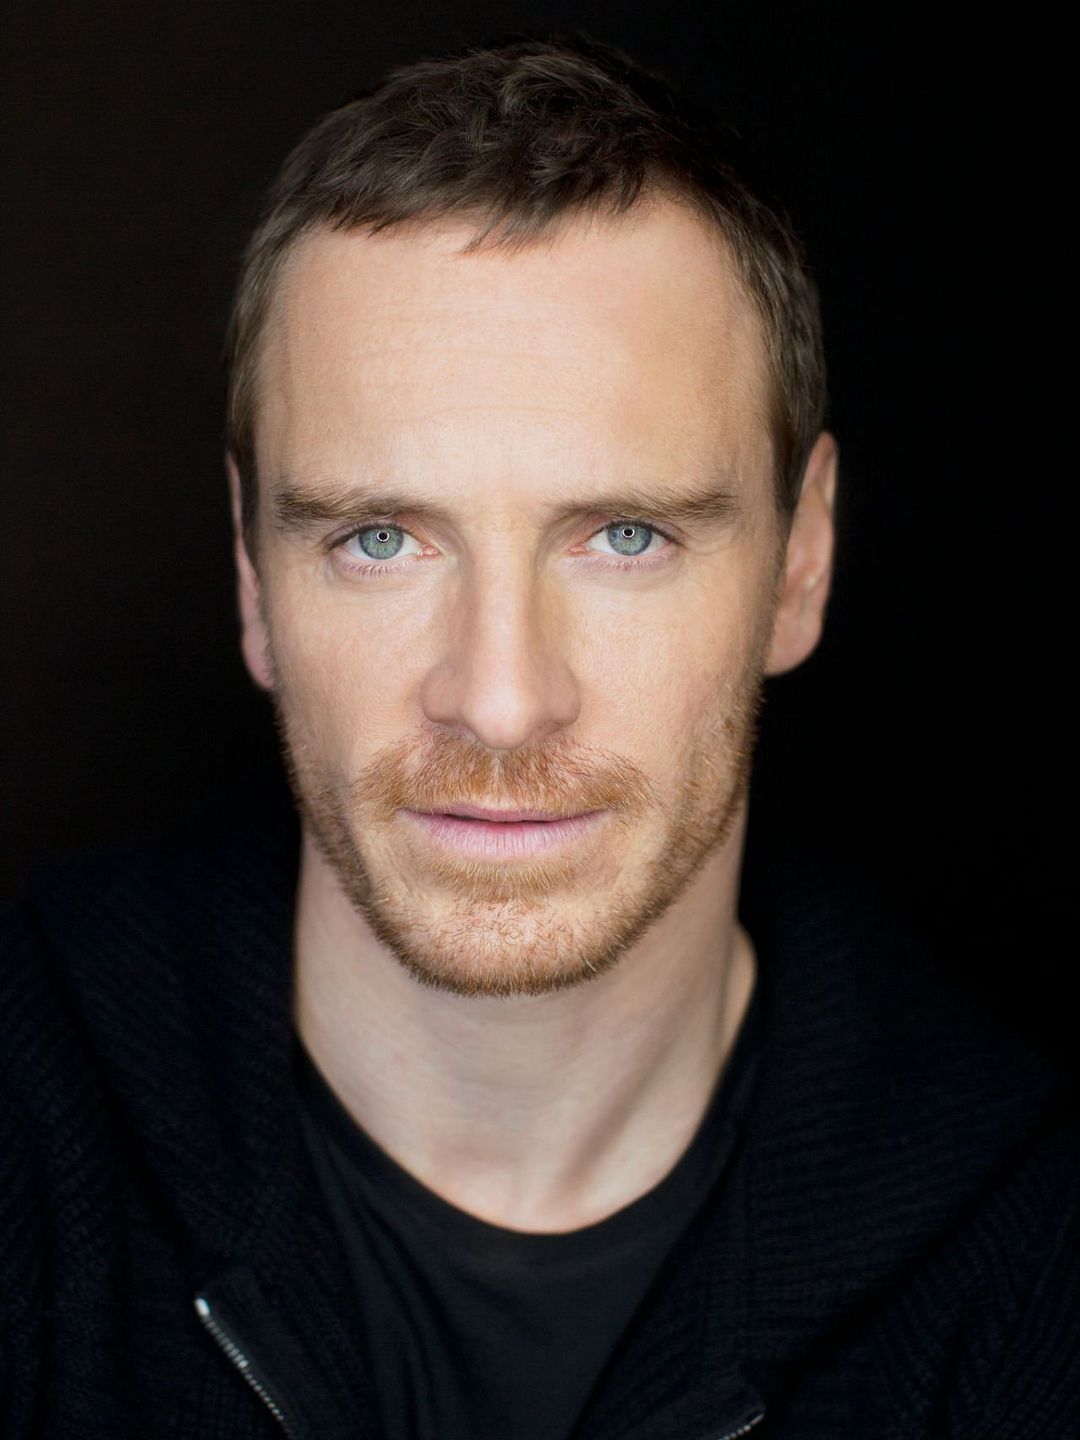 Michael Fassbender early life